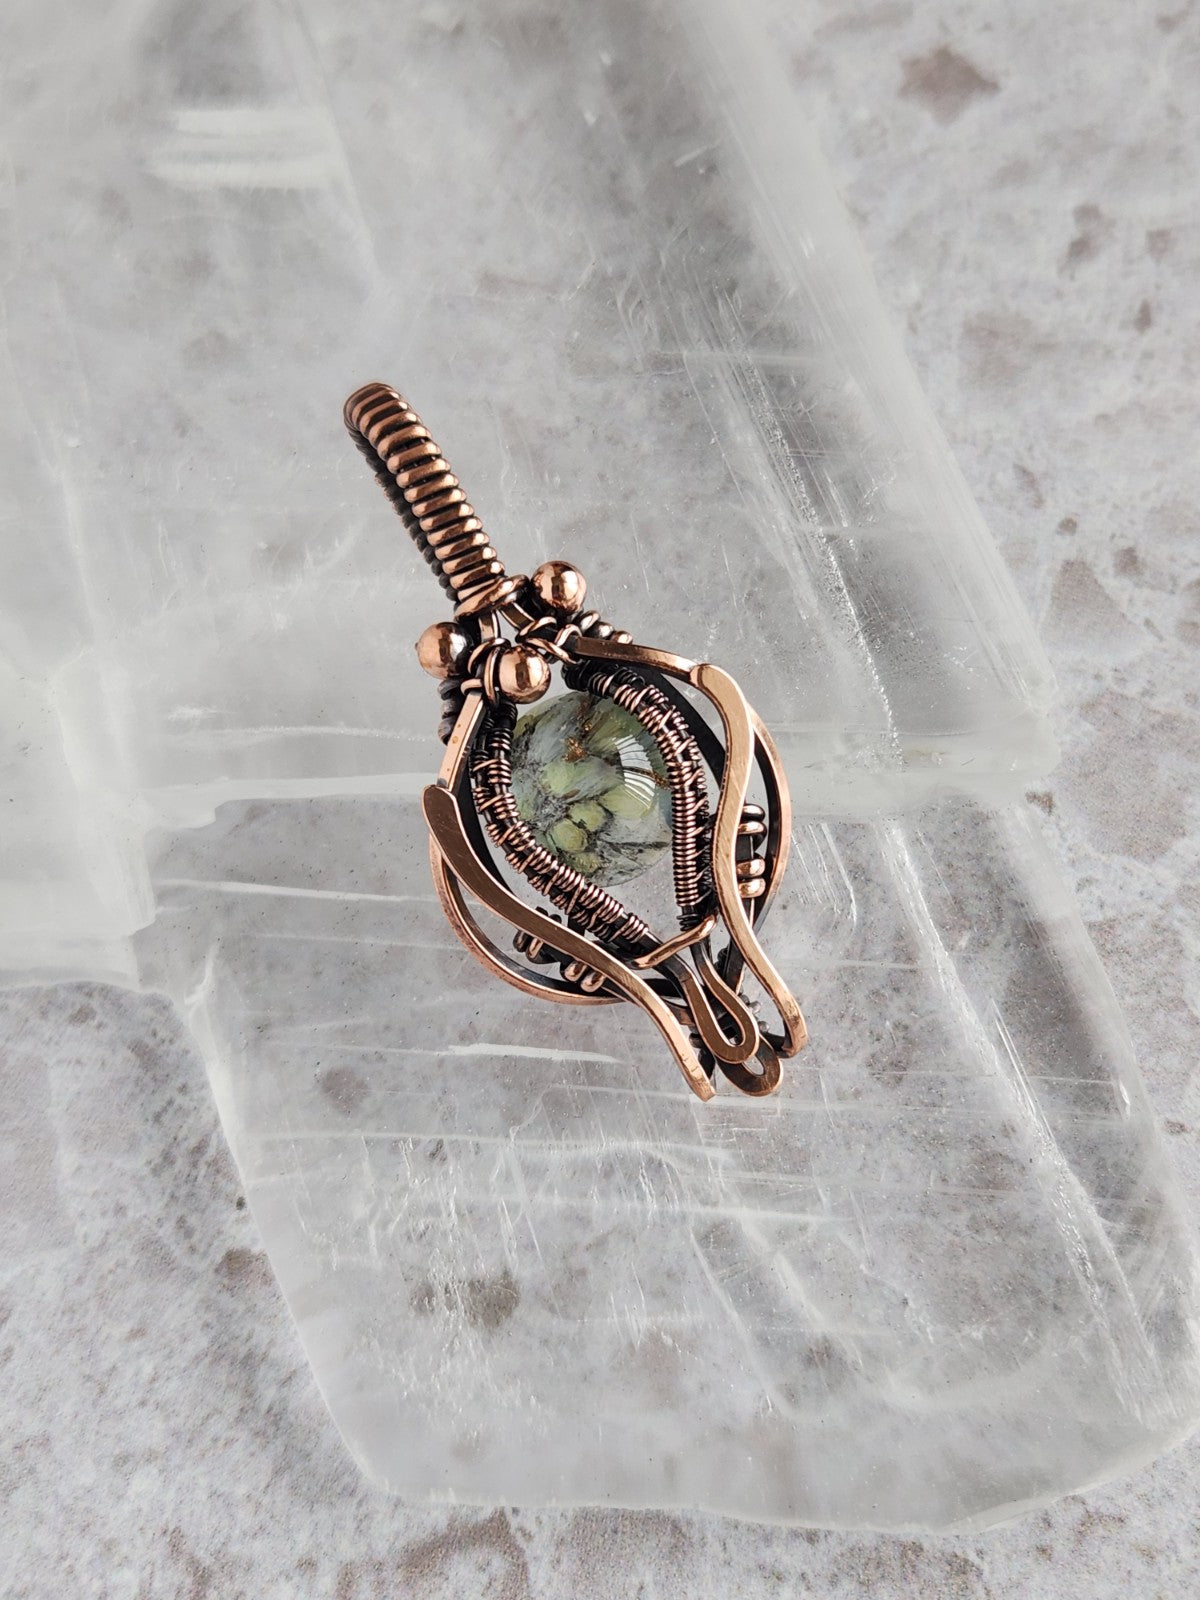 Vintage Green & Grey Glass in Copper Pendant